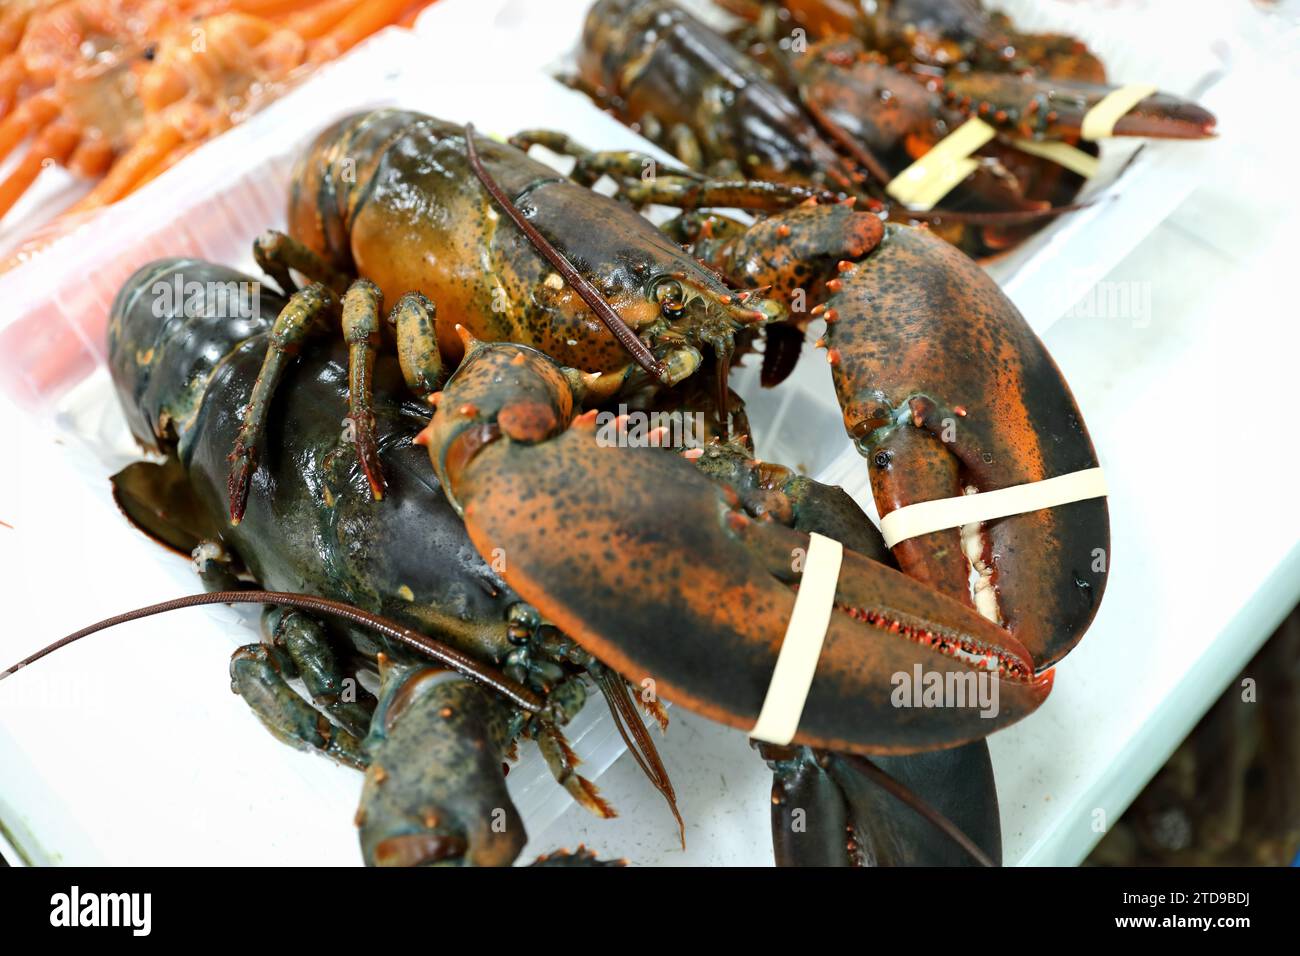 Seafood at the fish market in Korea Stock Photo